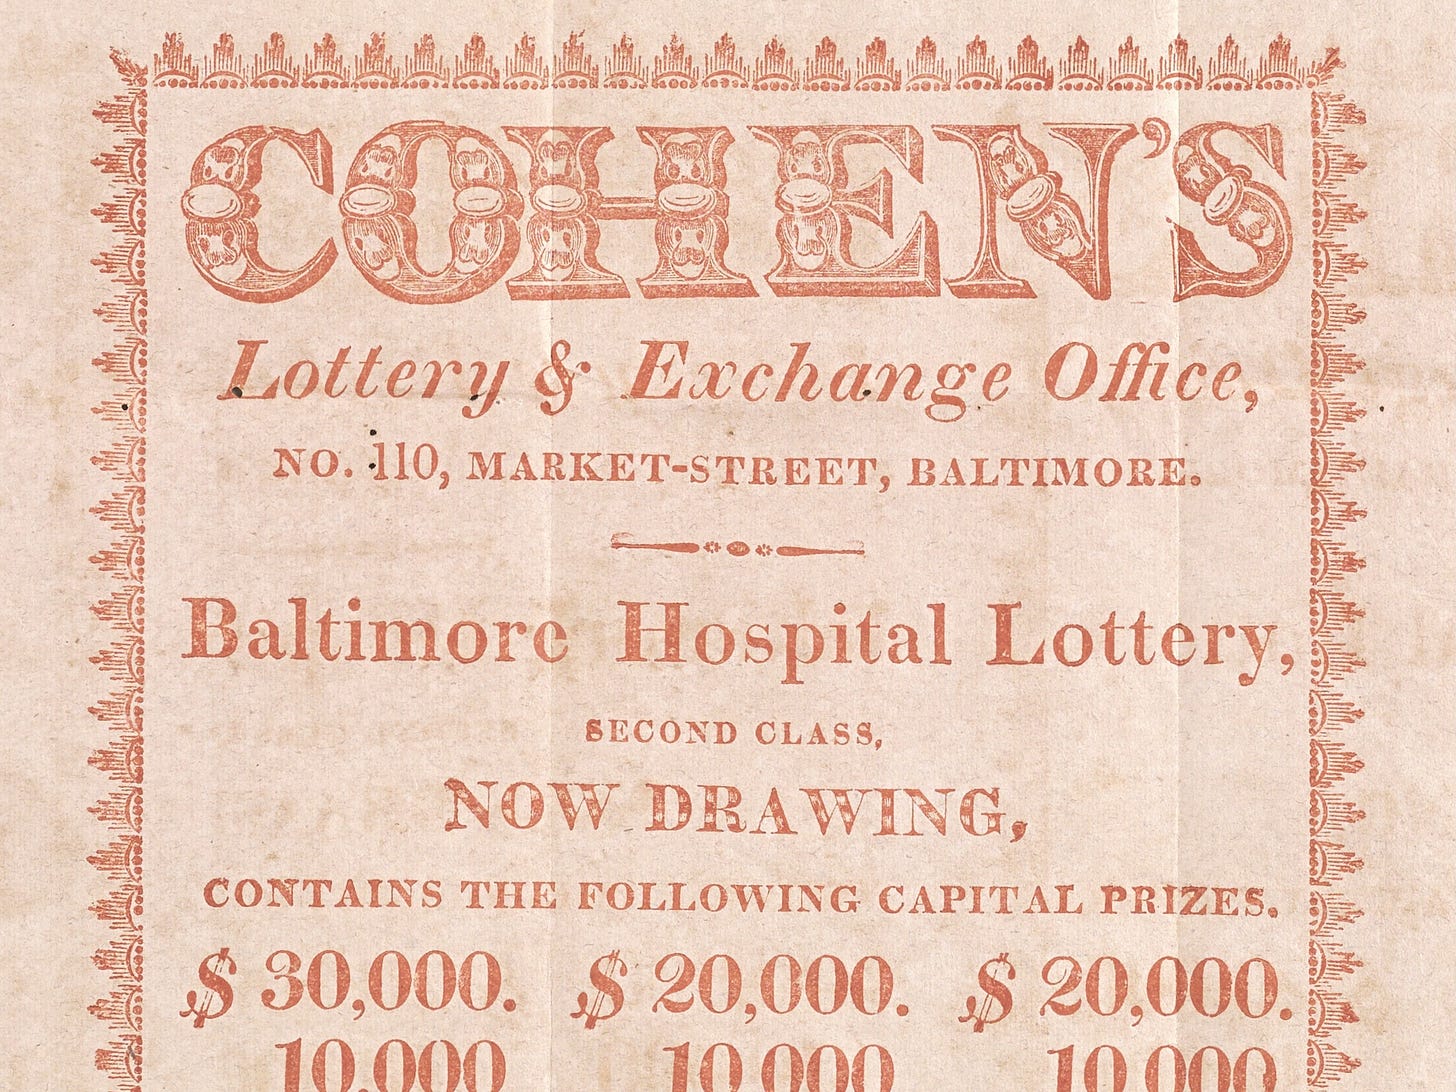 A broadside printed in orange ink that reads as follows: “COHEN’S Lottery & Exchange Office, No. 110, MARKET-STREET, BALTIMORE. Baltimore Hospital Lottery, SECOND CLASS, NOW DRAWING, CONTAINS THE FOLLOWING CAPITAL PRIZES. $30,000. $20,000. $20,000…”